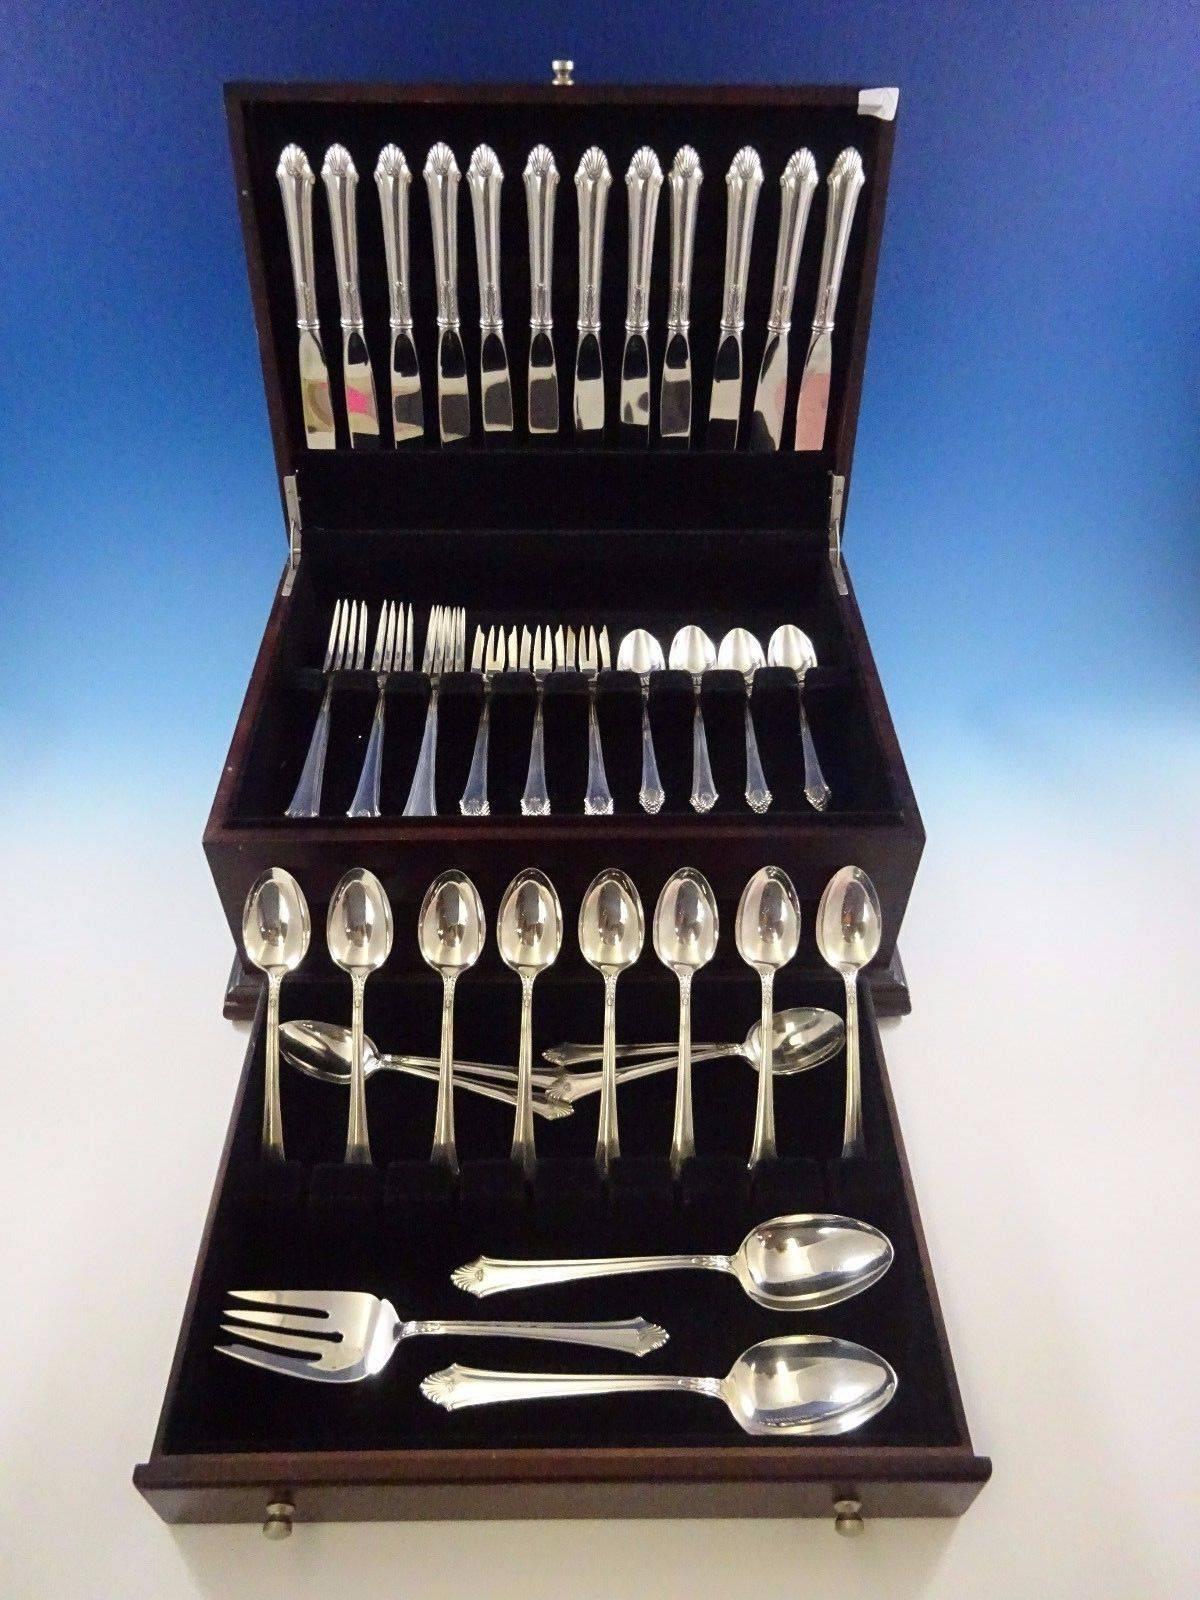 Lovely Edgemont by Gorham sterling silver dinner size flatware set of 63 pieces. This set includes:
 
12 dinner knives, 9 3/8